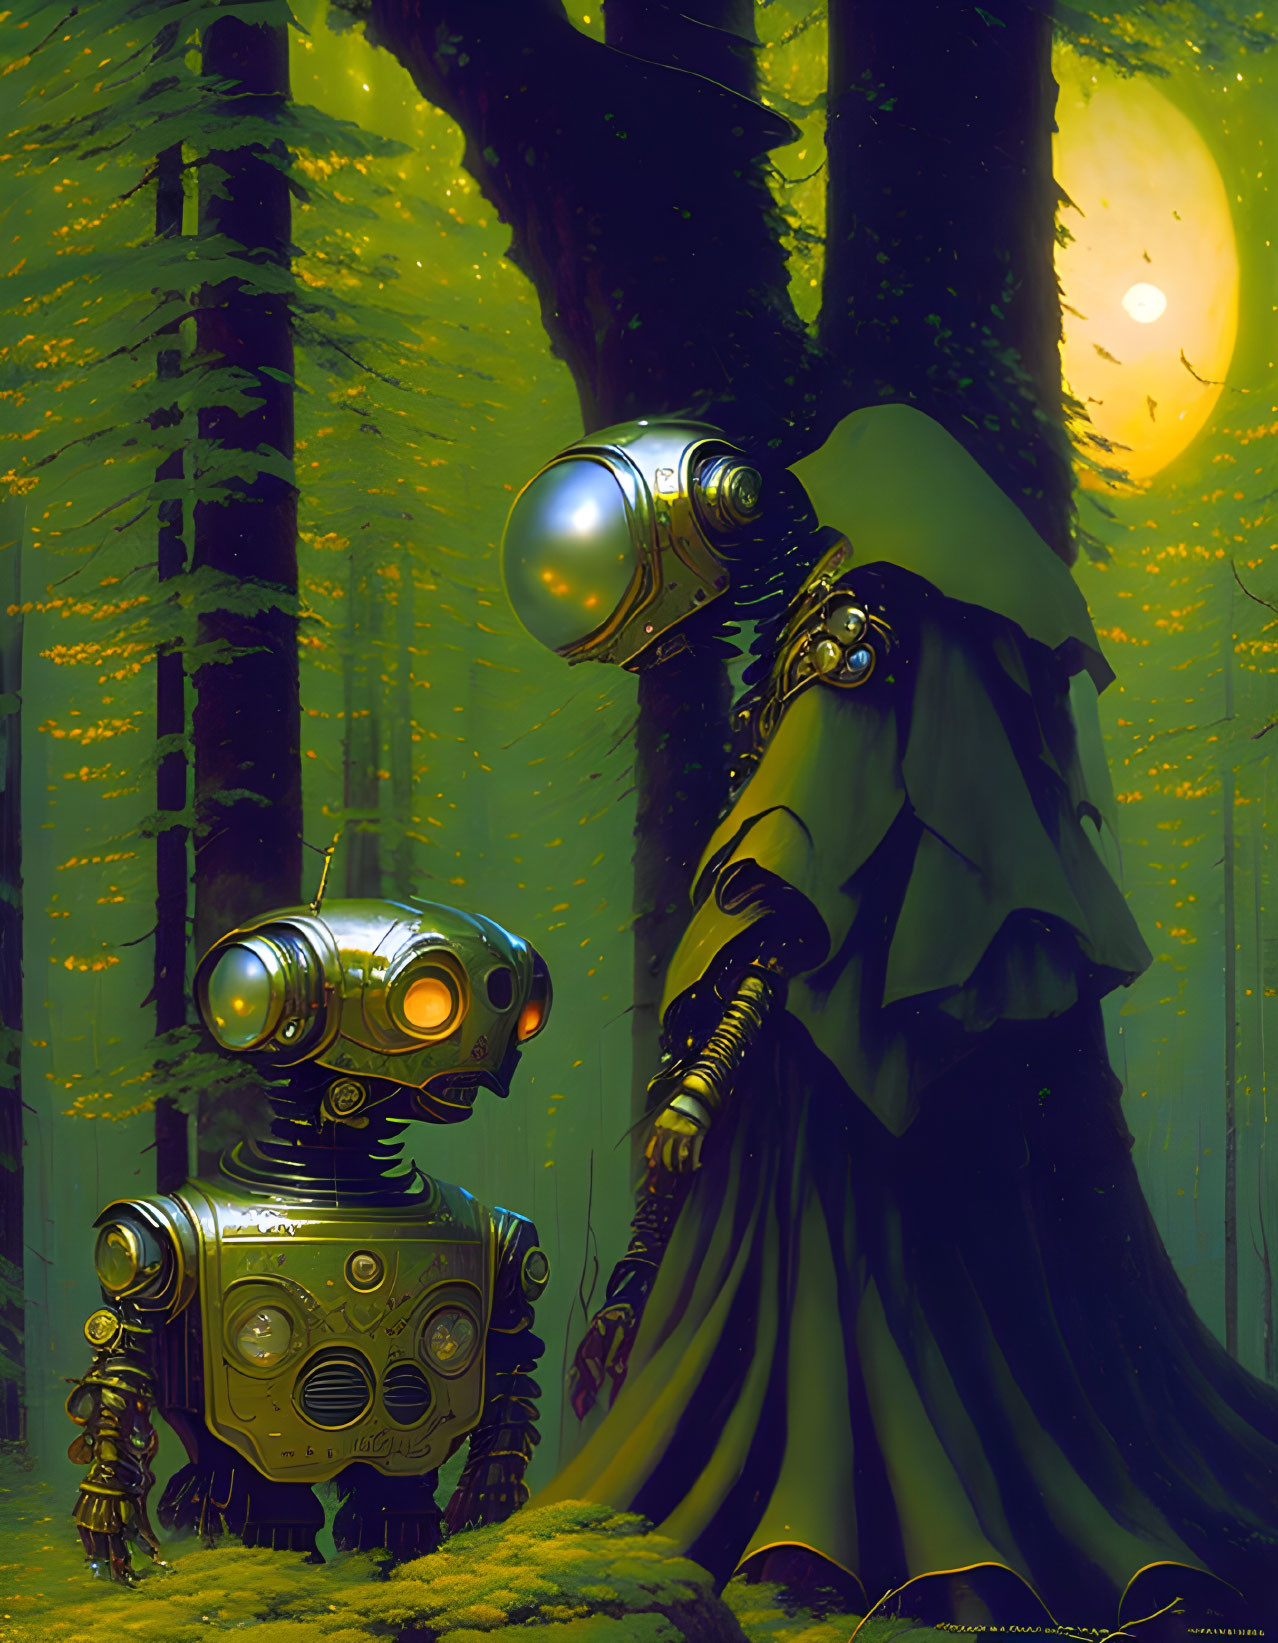 Humanoid robots in mystical forest under yellow light